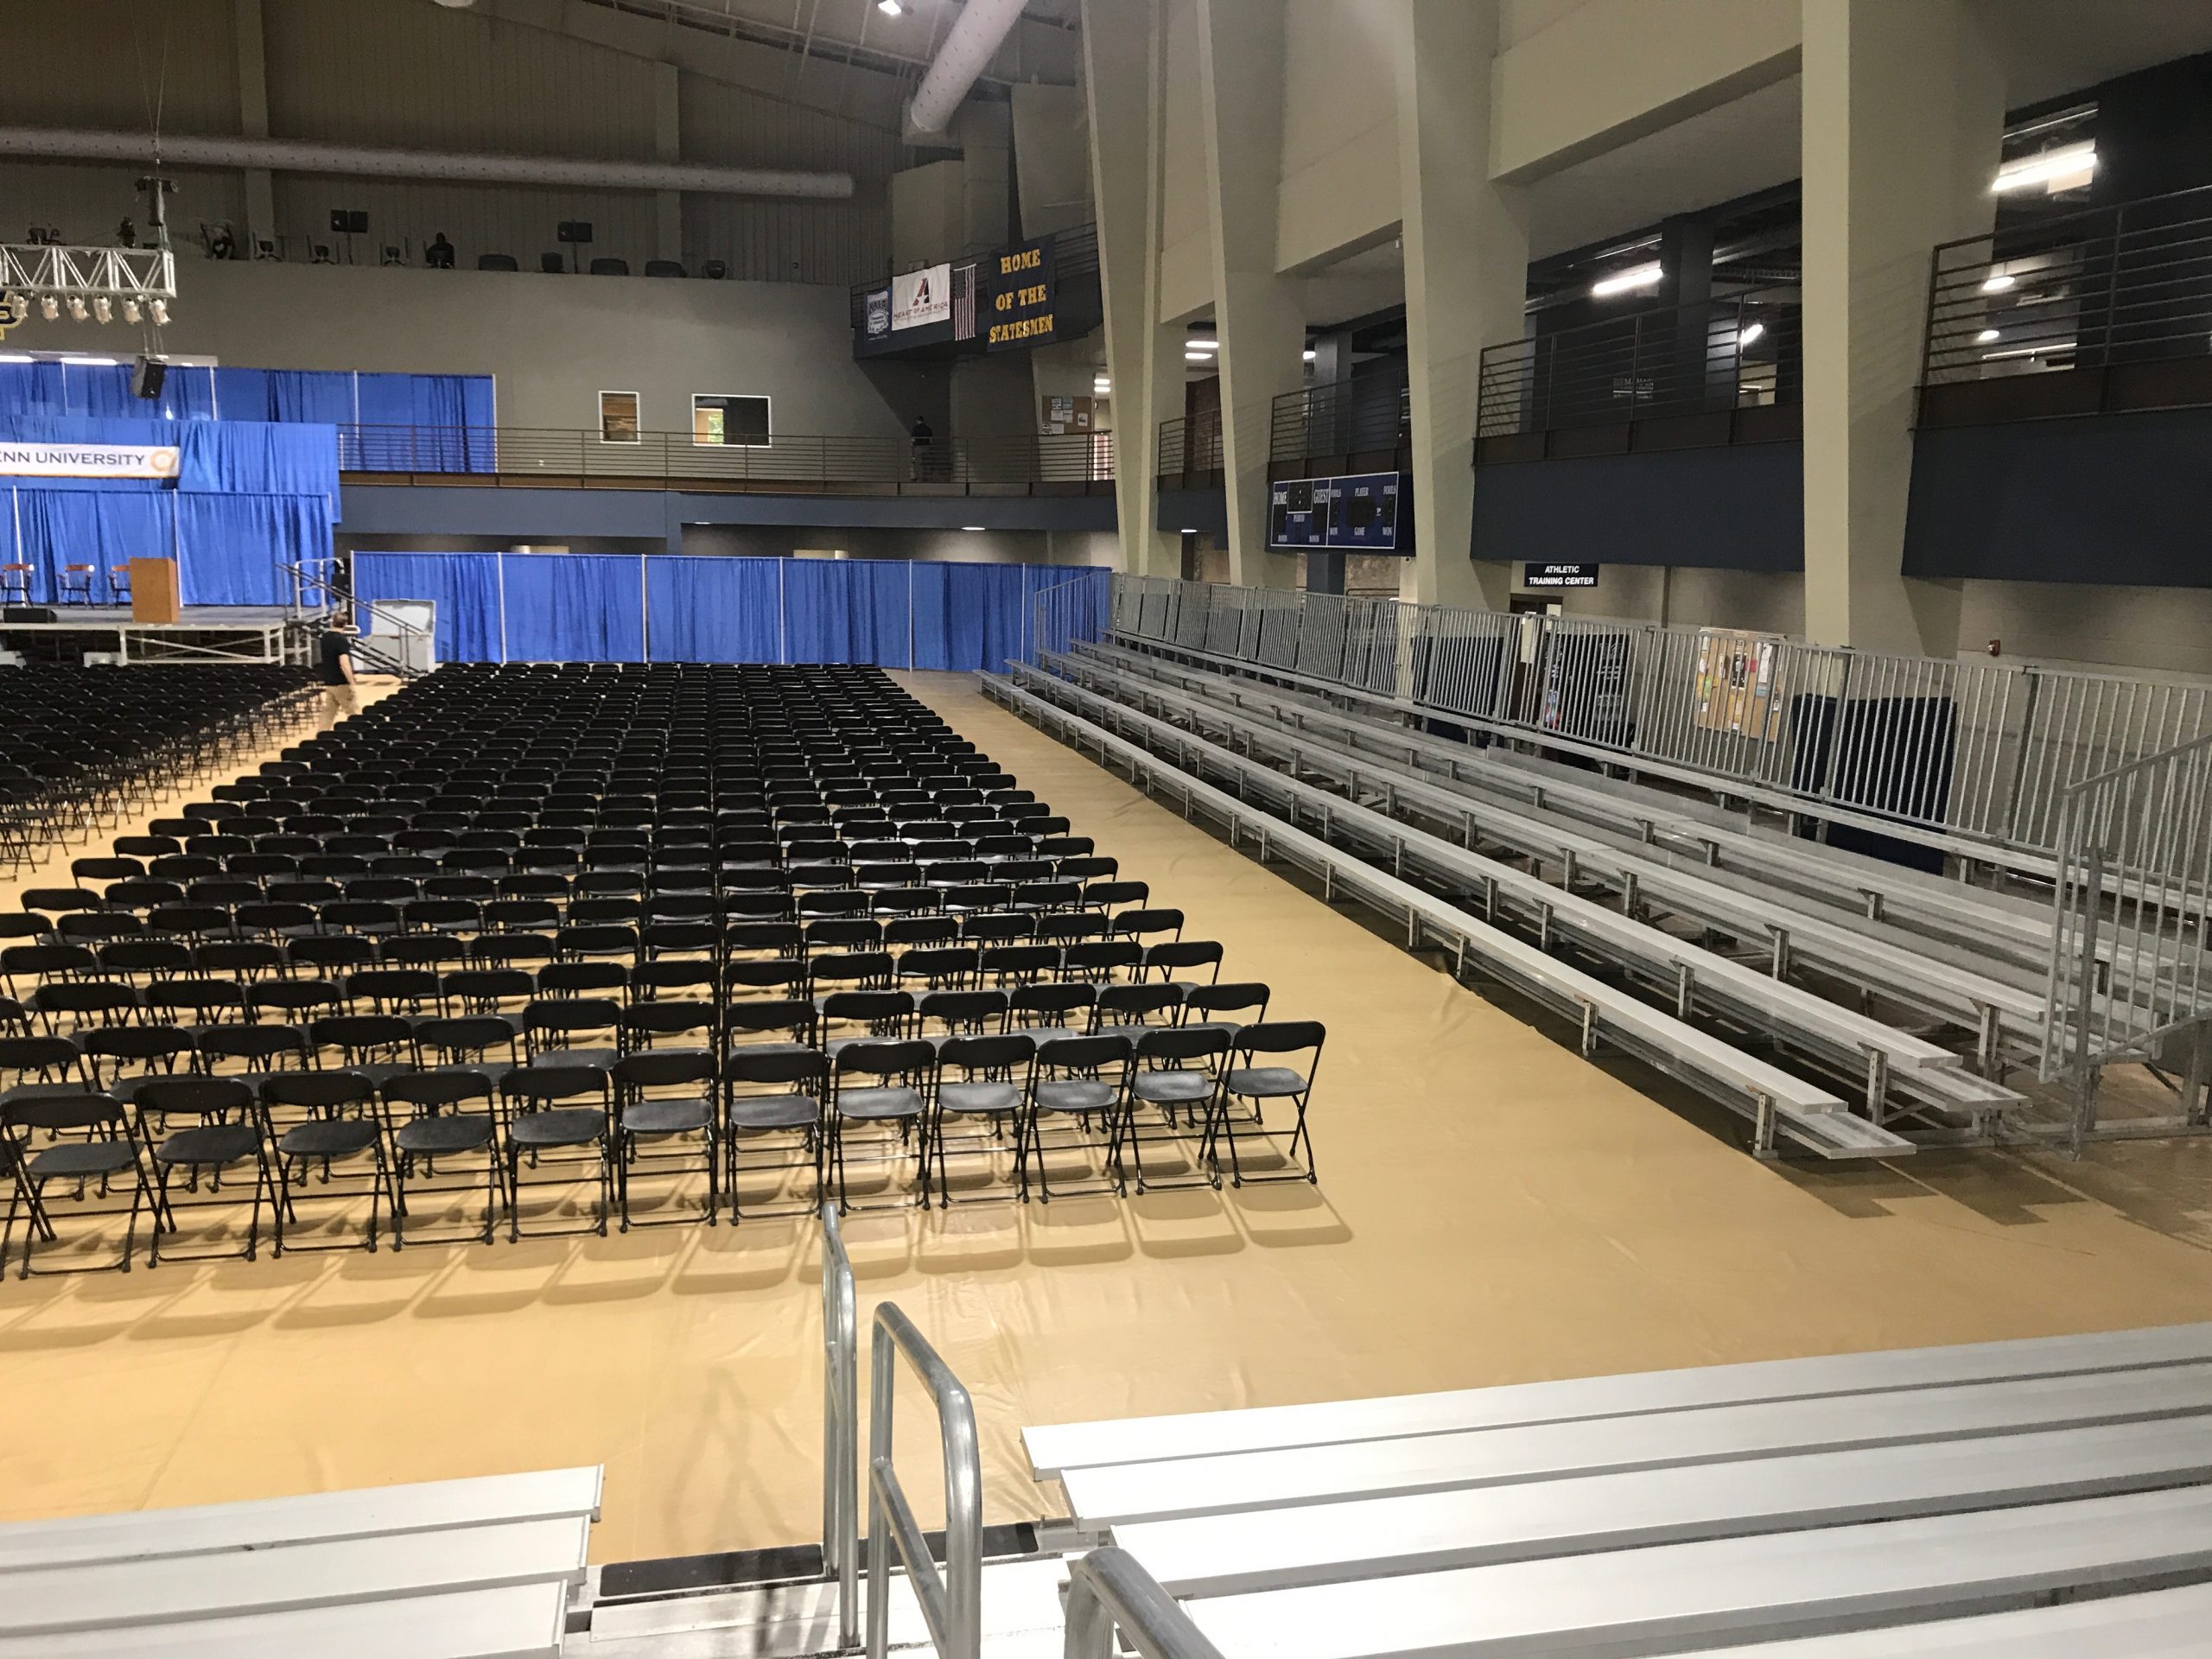 Stage, Chairs, Bleachers and more setup for 2017 Graduation at William Penn University in Oskaloosa, Iowa